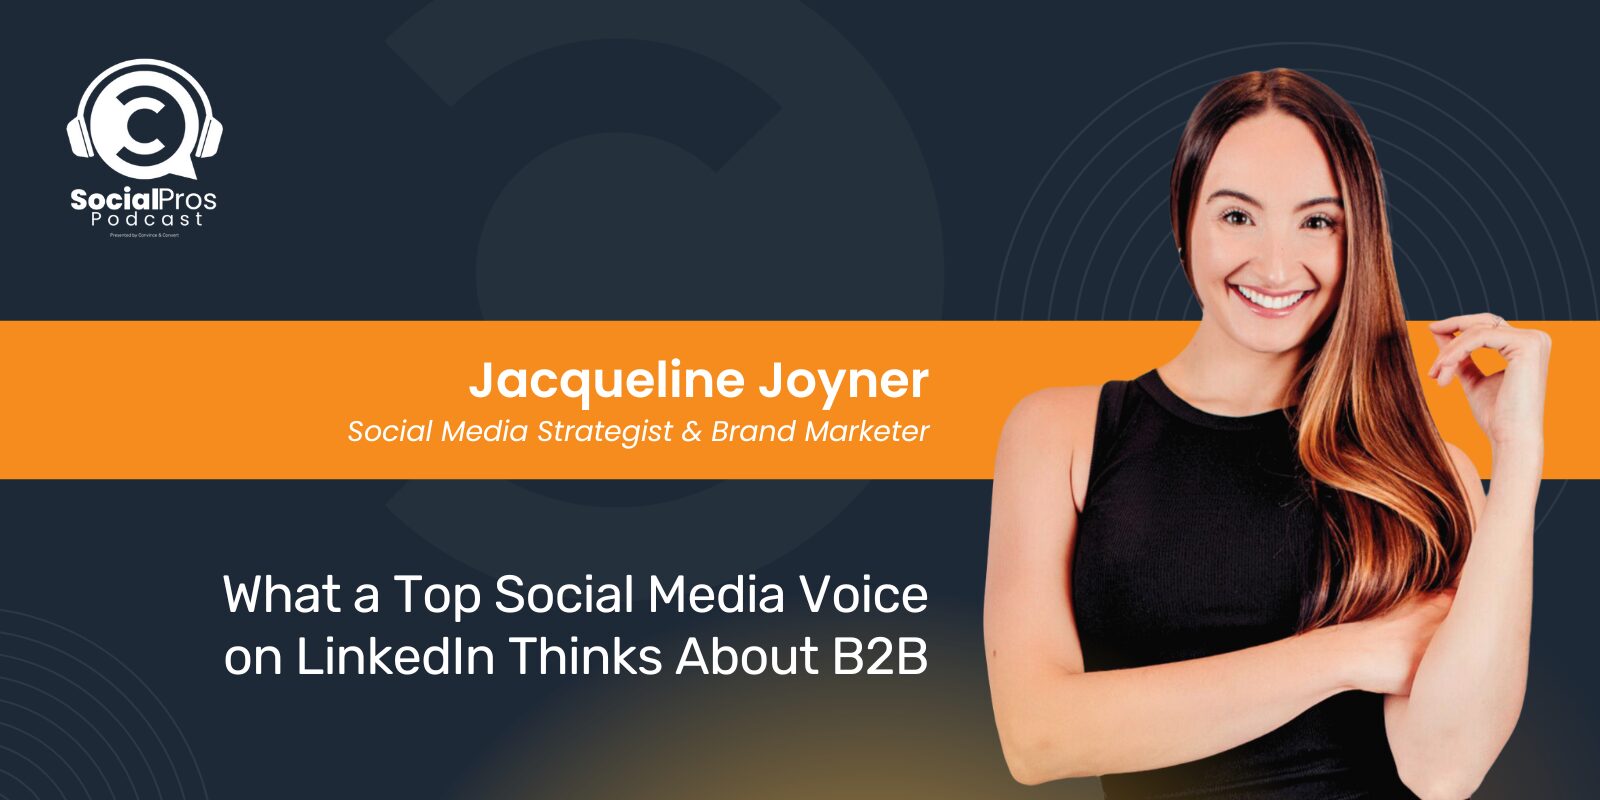 What a Top Social Media Voice on LinkedIn Thinks About B2B